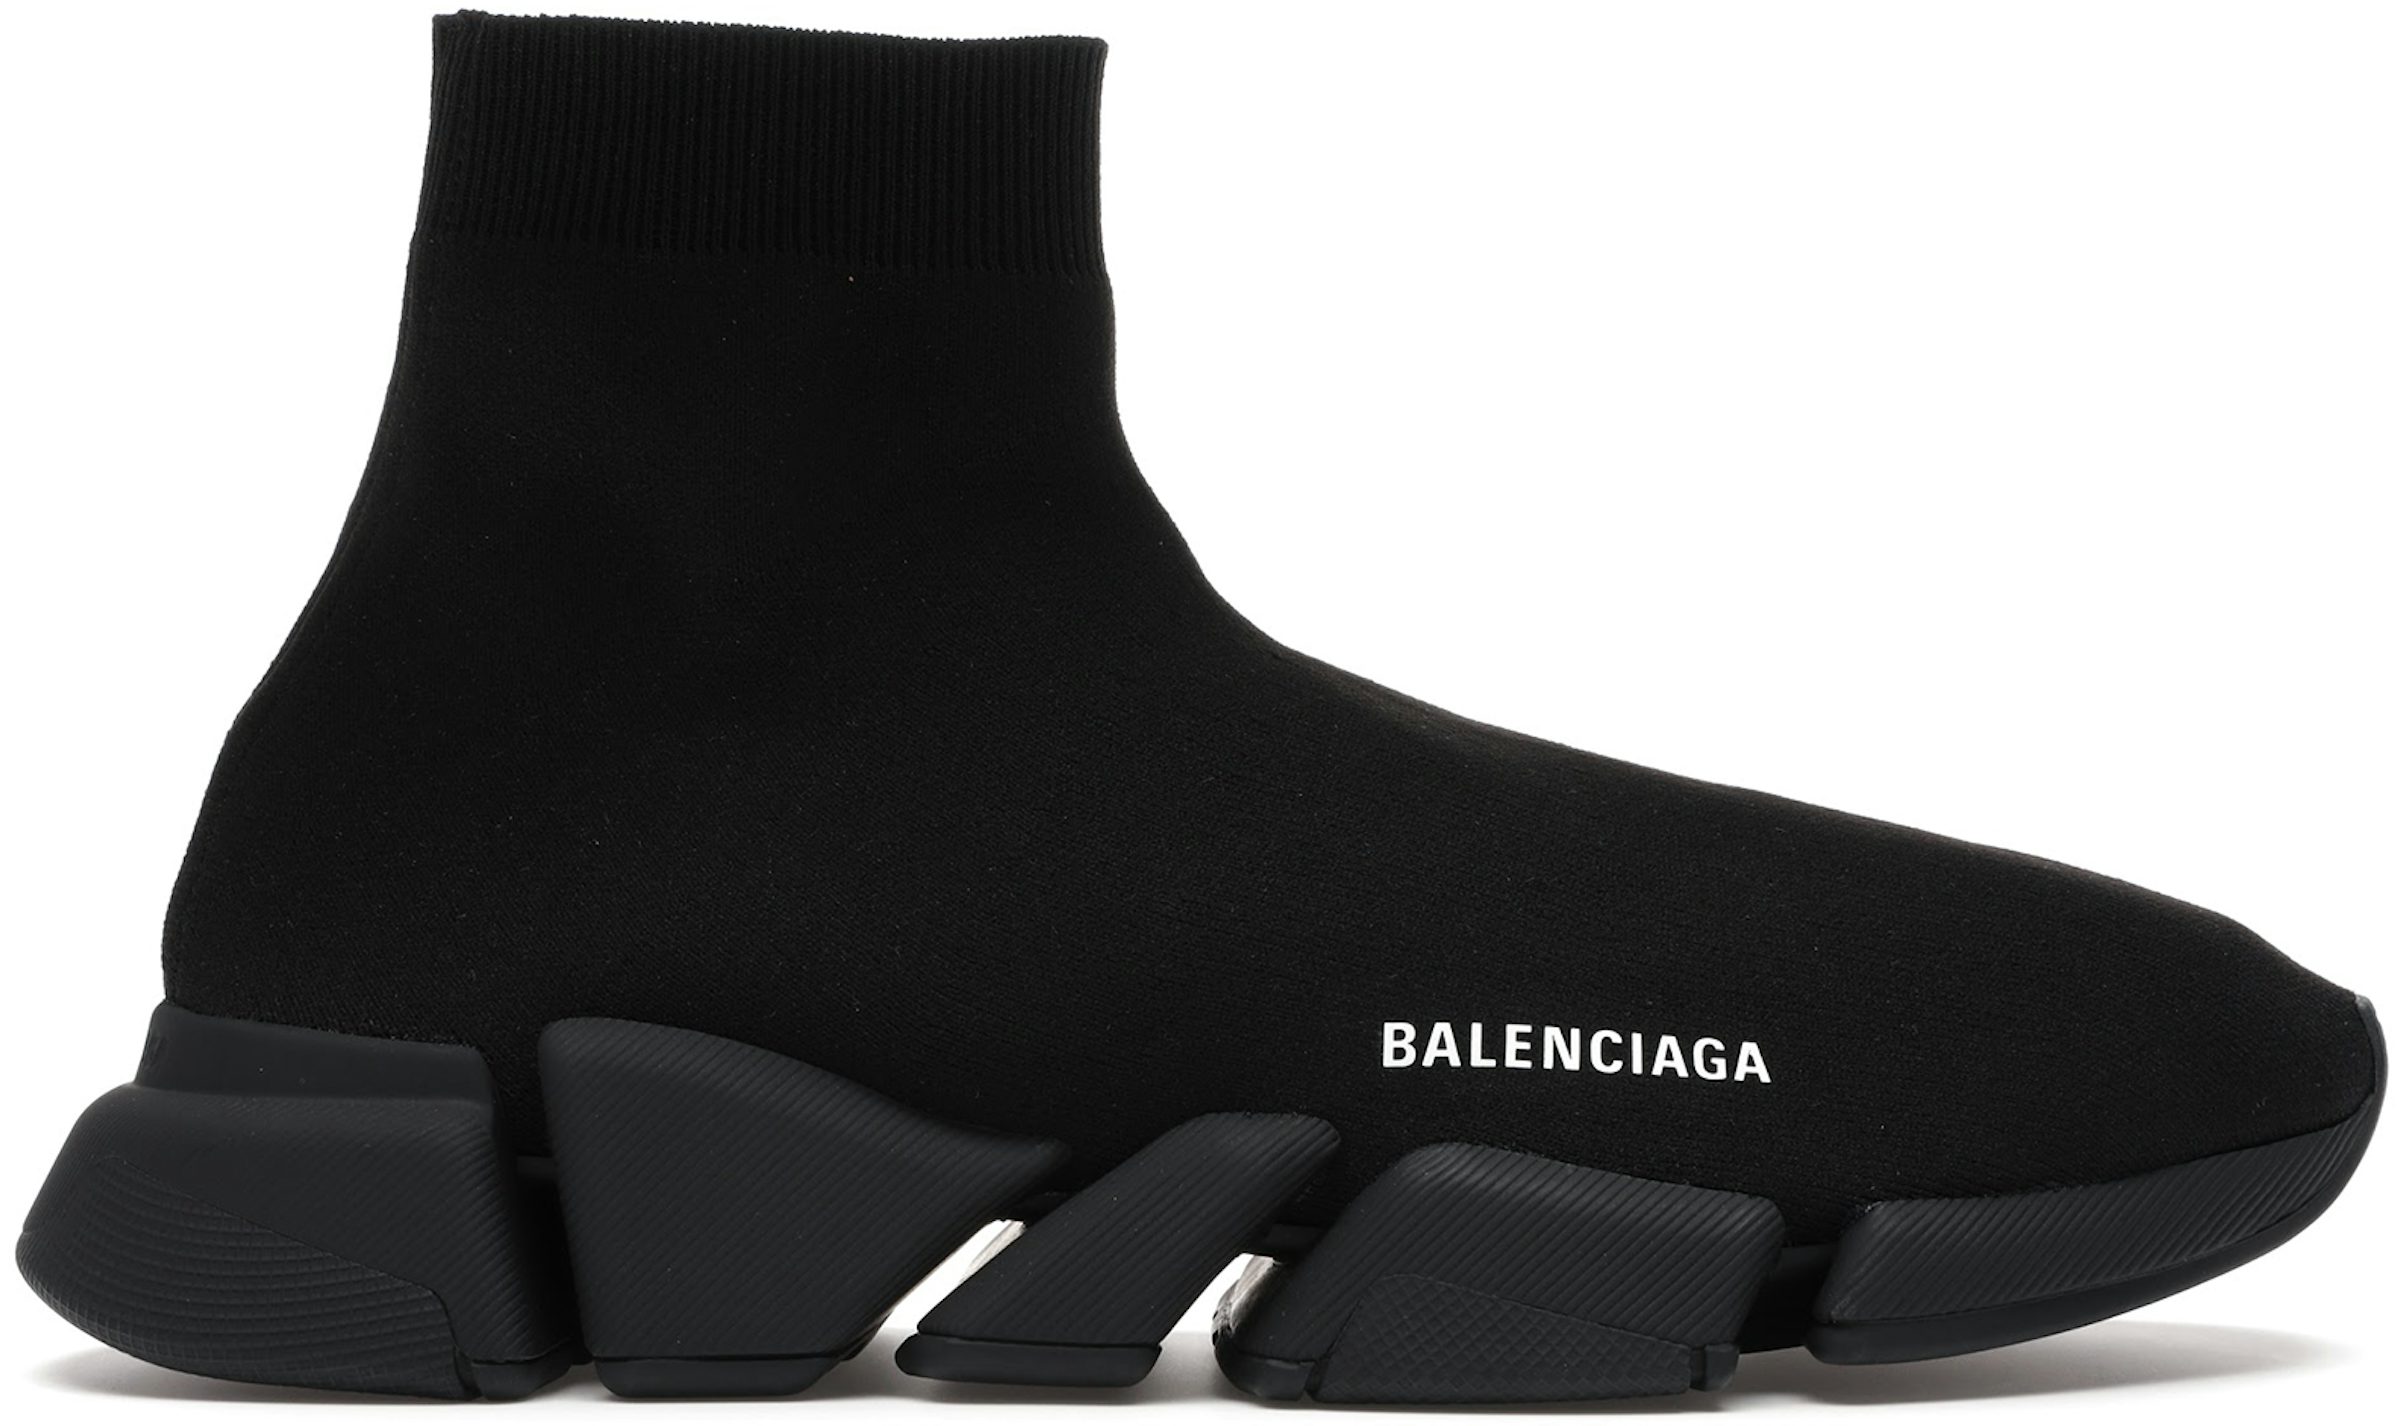 Are Balenciaga Speed Trainers Worth it? Balenciaga Fit Review 